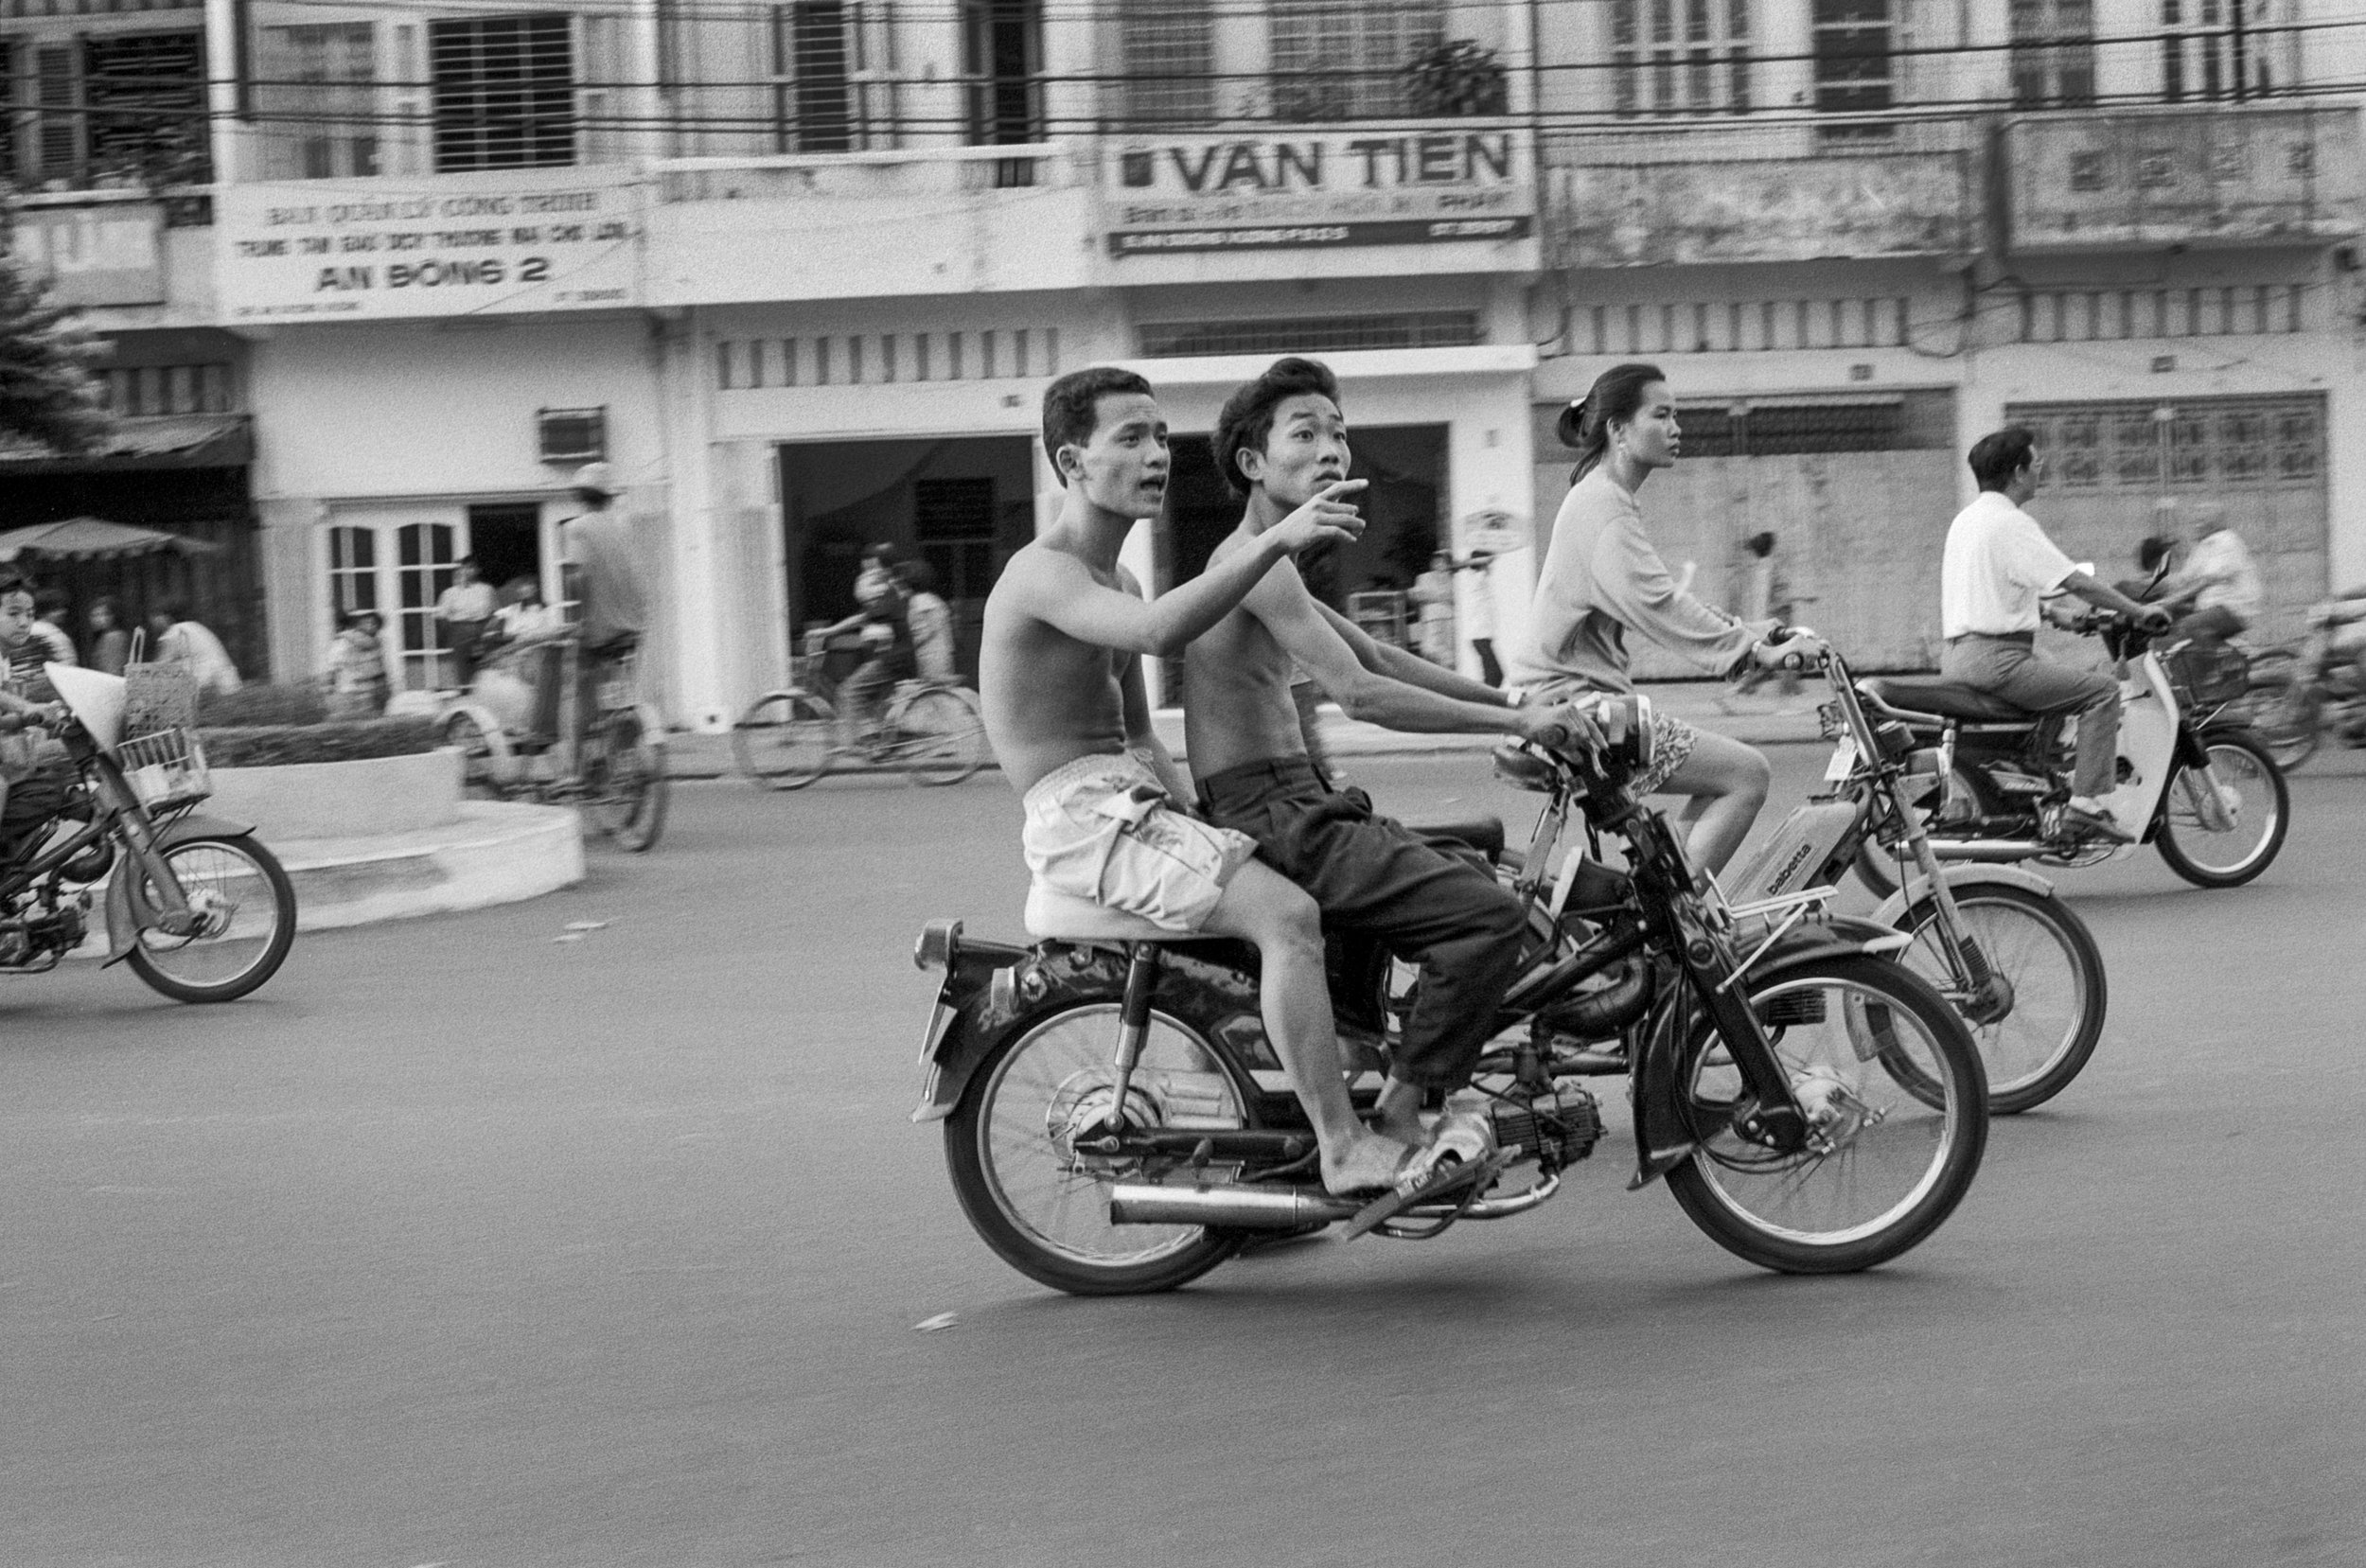  Vietnamese youth travel through the city shirtless on a motorbike. 